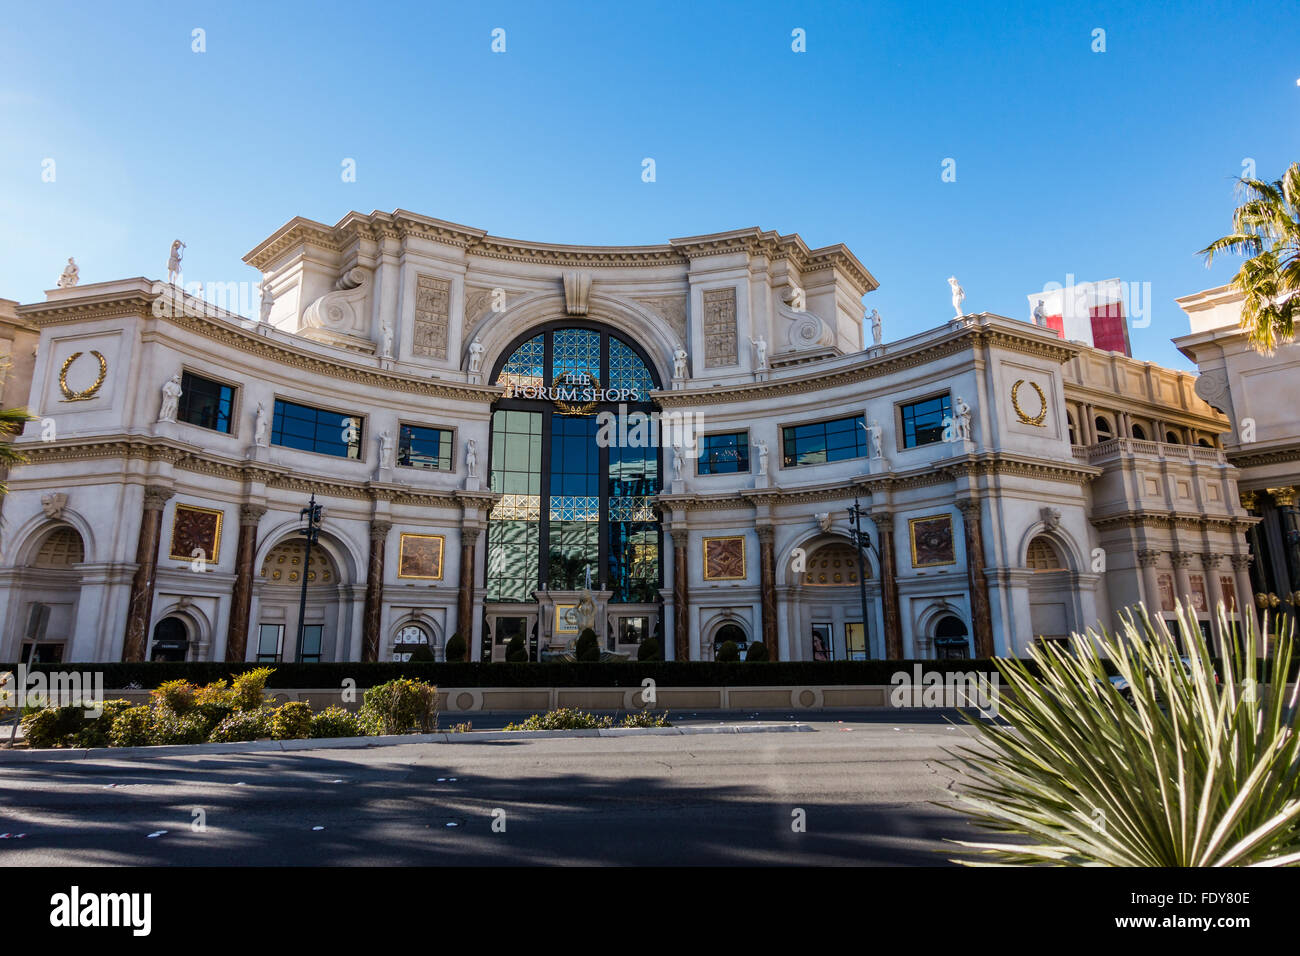 The Forum Shops shopping mall in Caesars Palace casino in Las Vegas, Nevada, USA Stock Photo